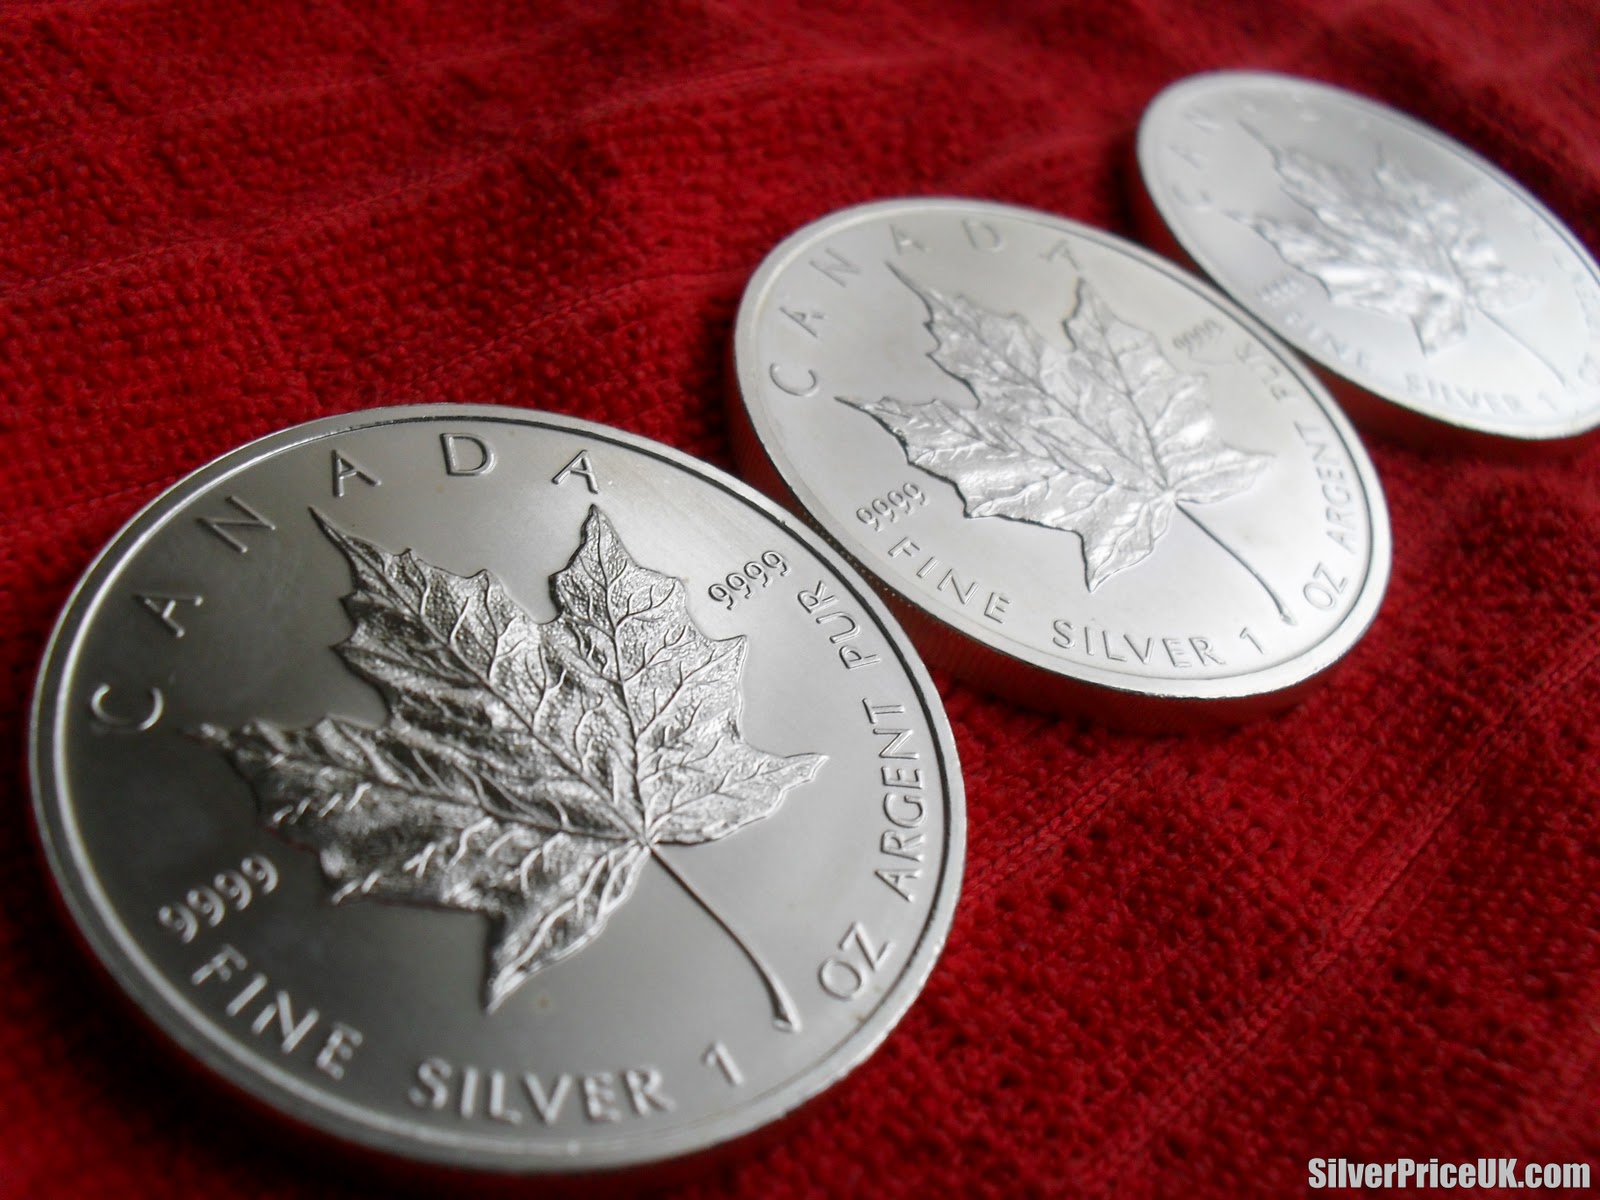 Best Silver Coins to Buy